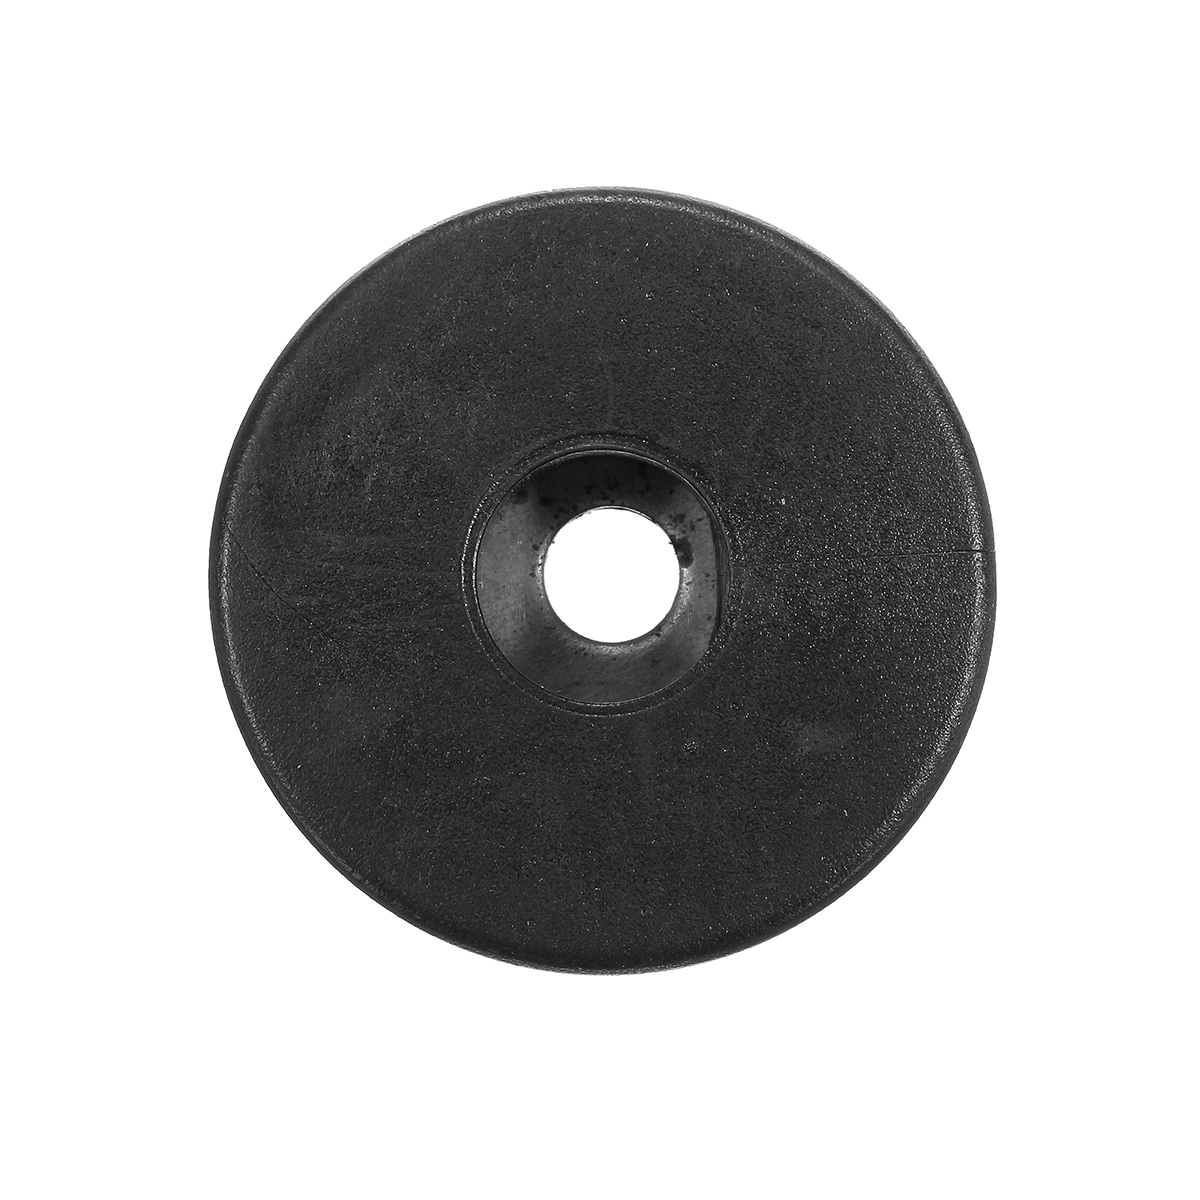 Find 38mm x 15mm Hifi Speaker Cabinets Rubber Feet Bumpers Damper Pad Base Case for Sale on Gipsybee.com with cryptocurrencies